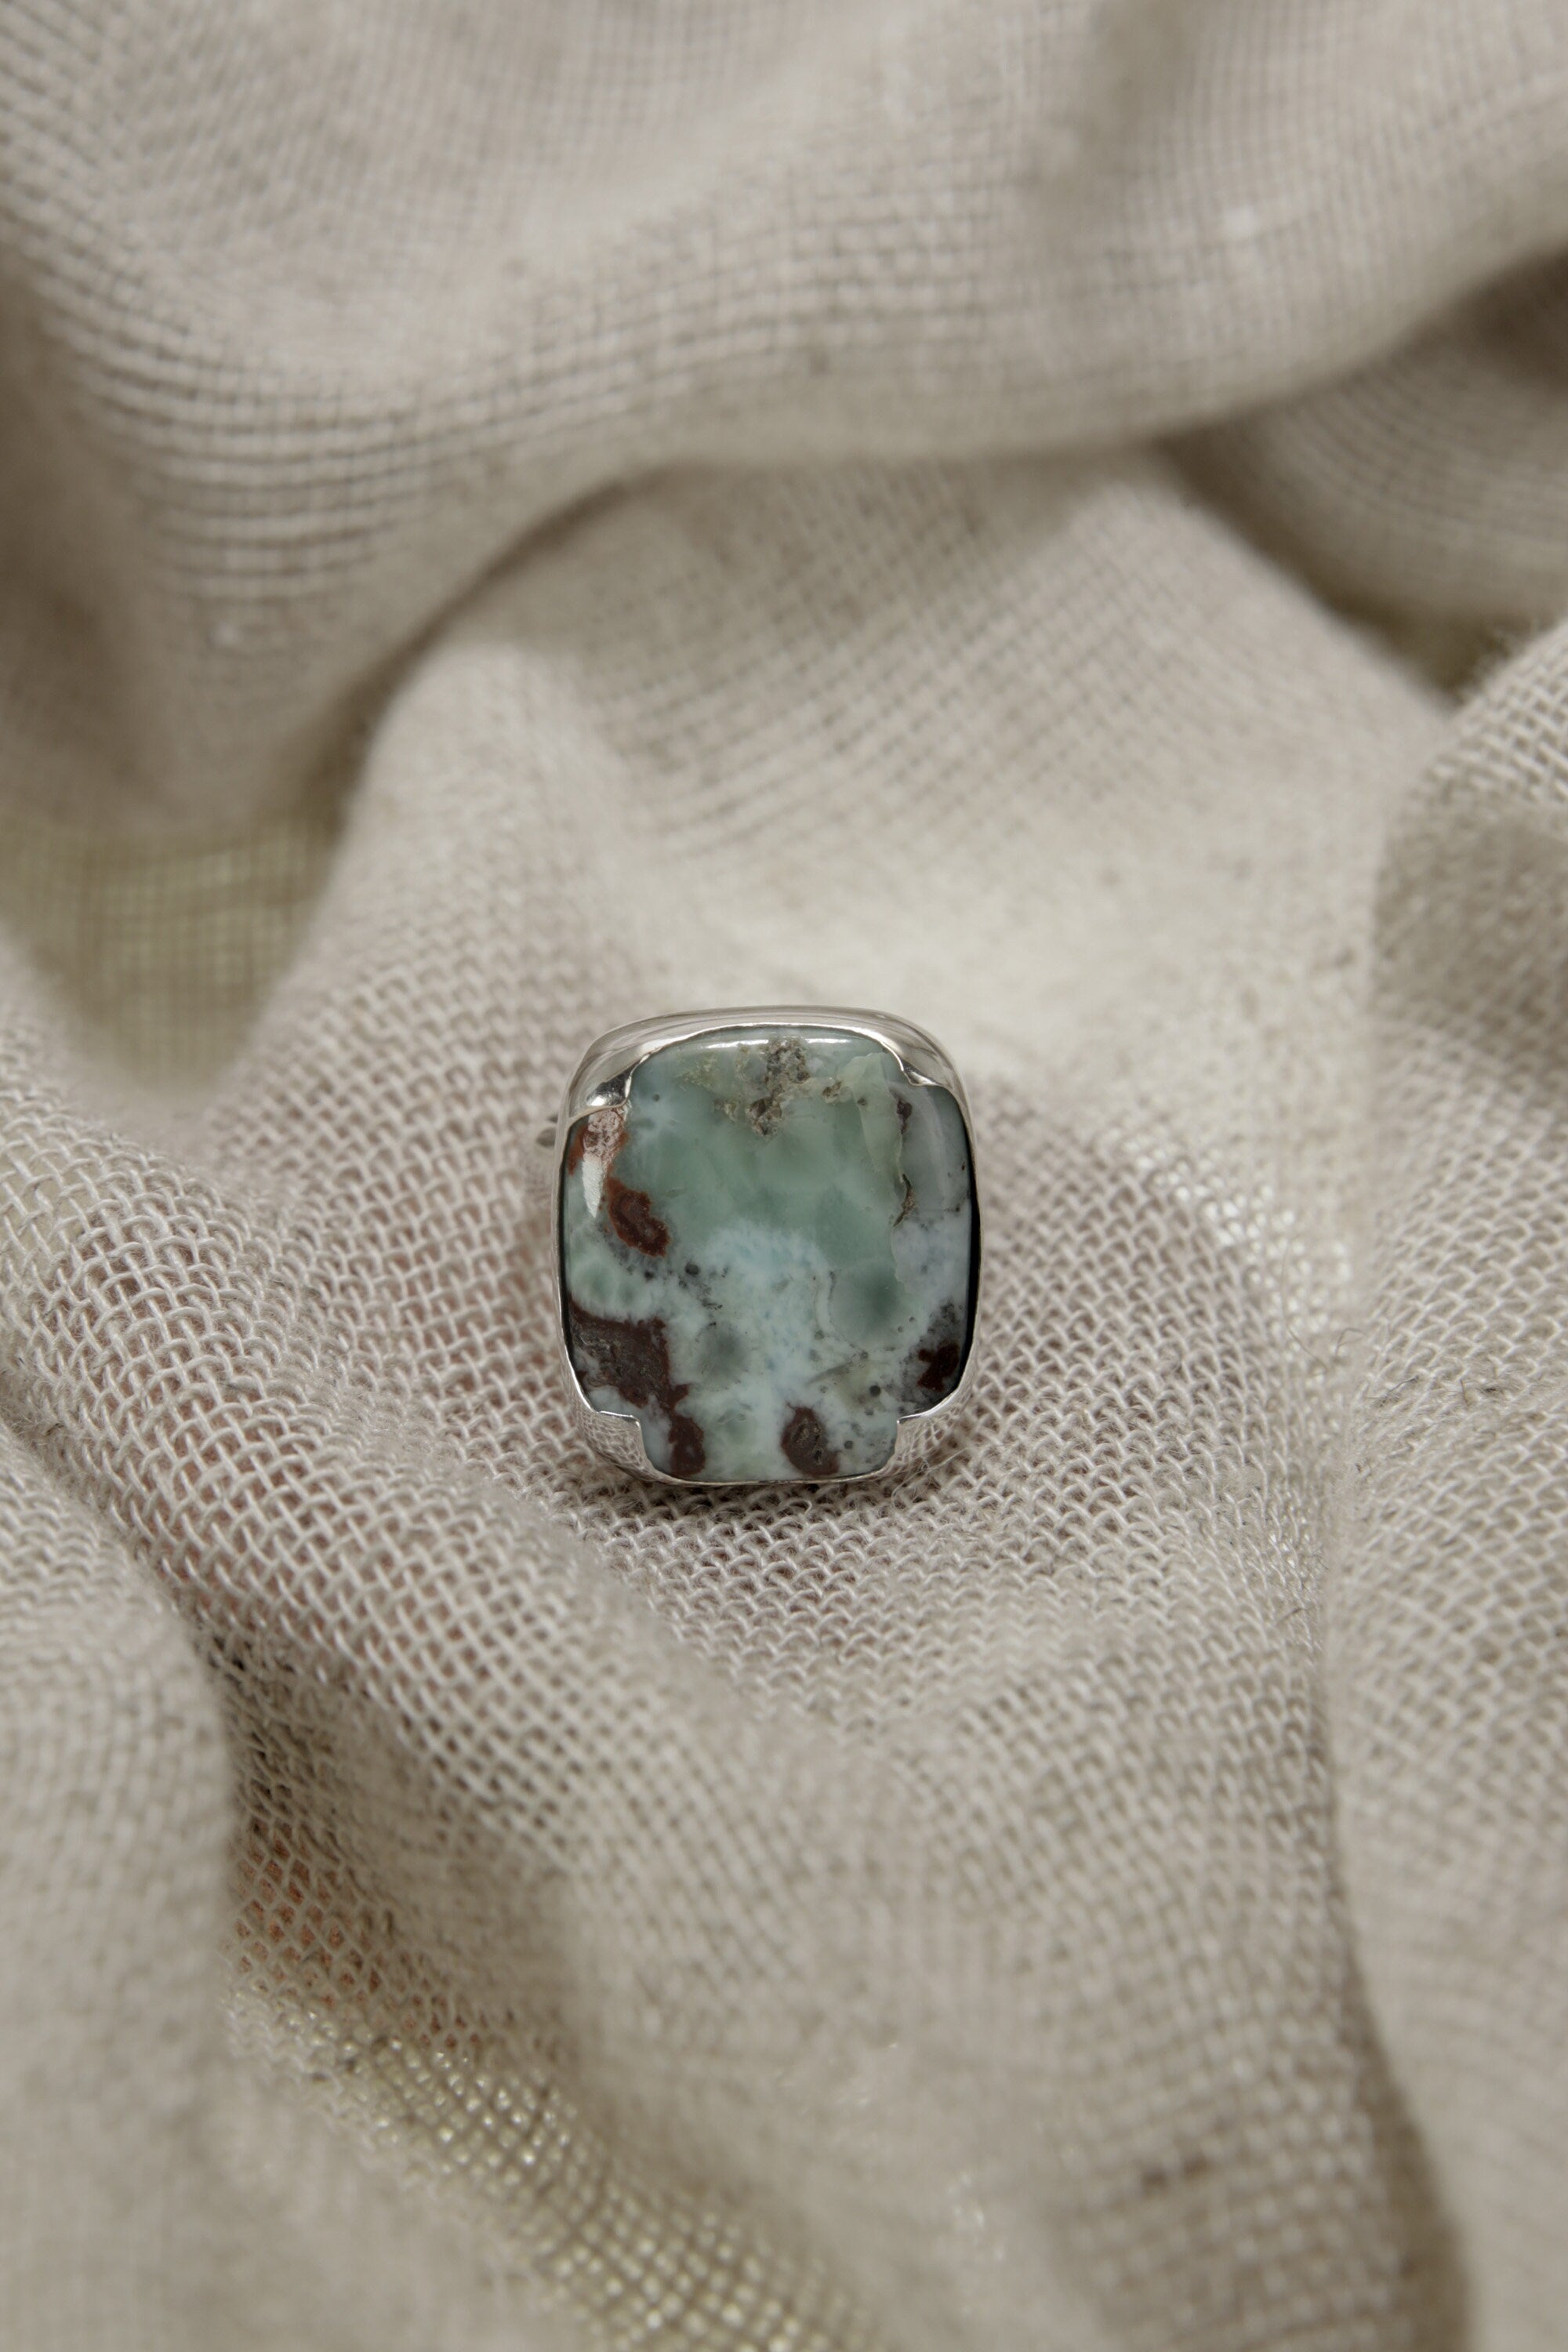 Ocean's Embrace: Adjustable Sterling Silver Ring with Larimar - Unisex - Size 5-12 US